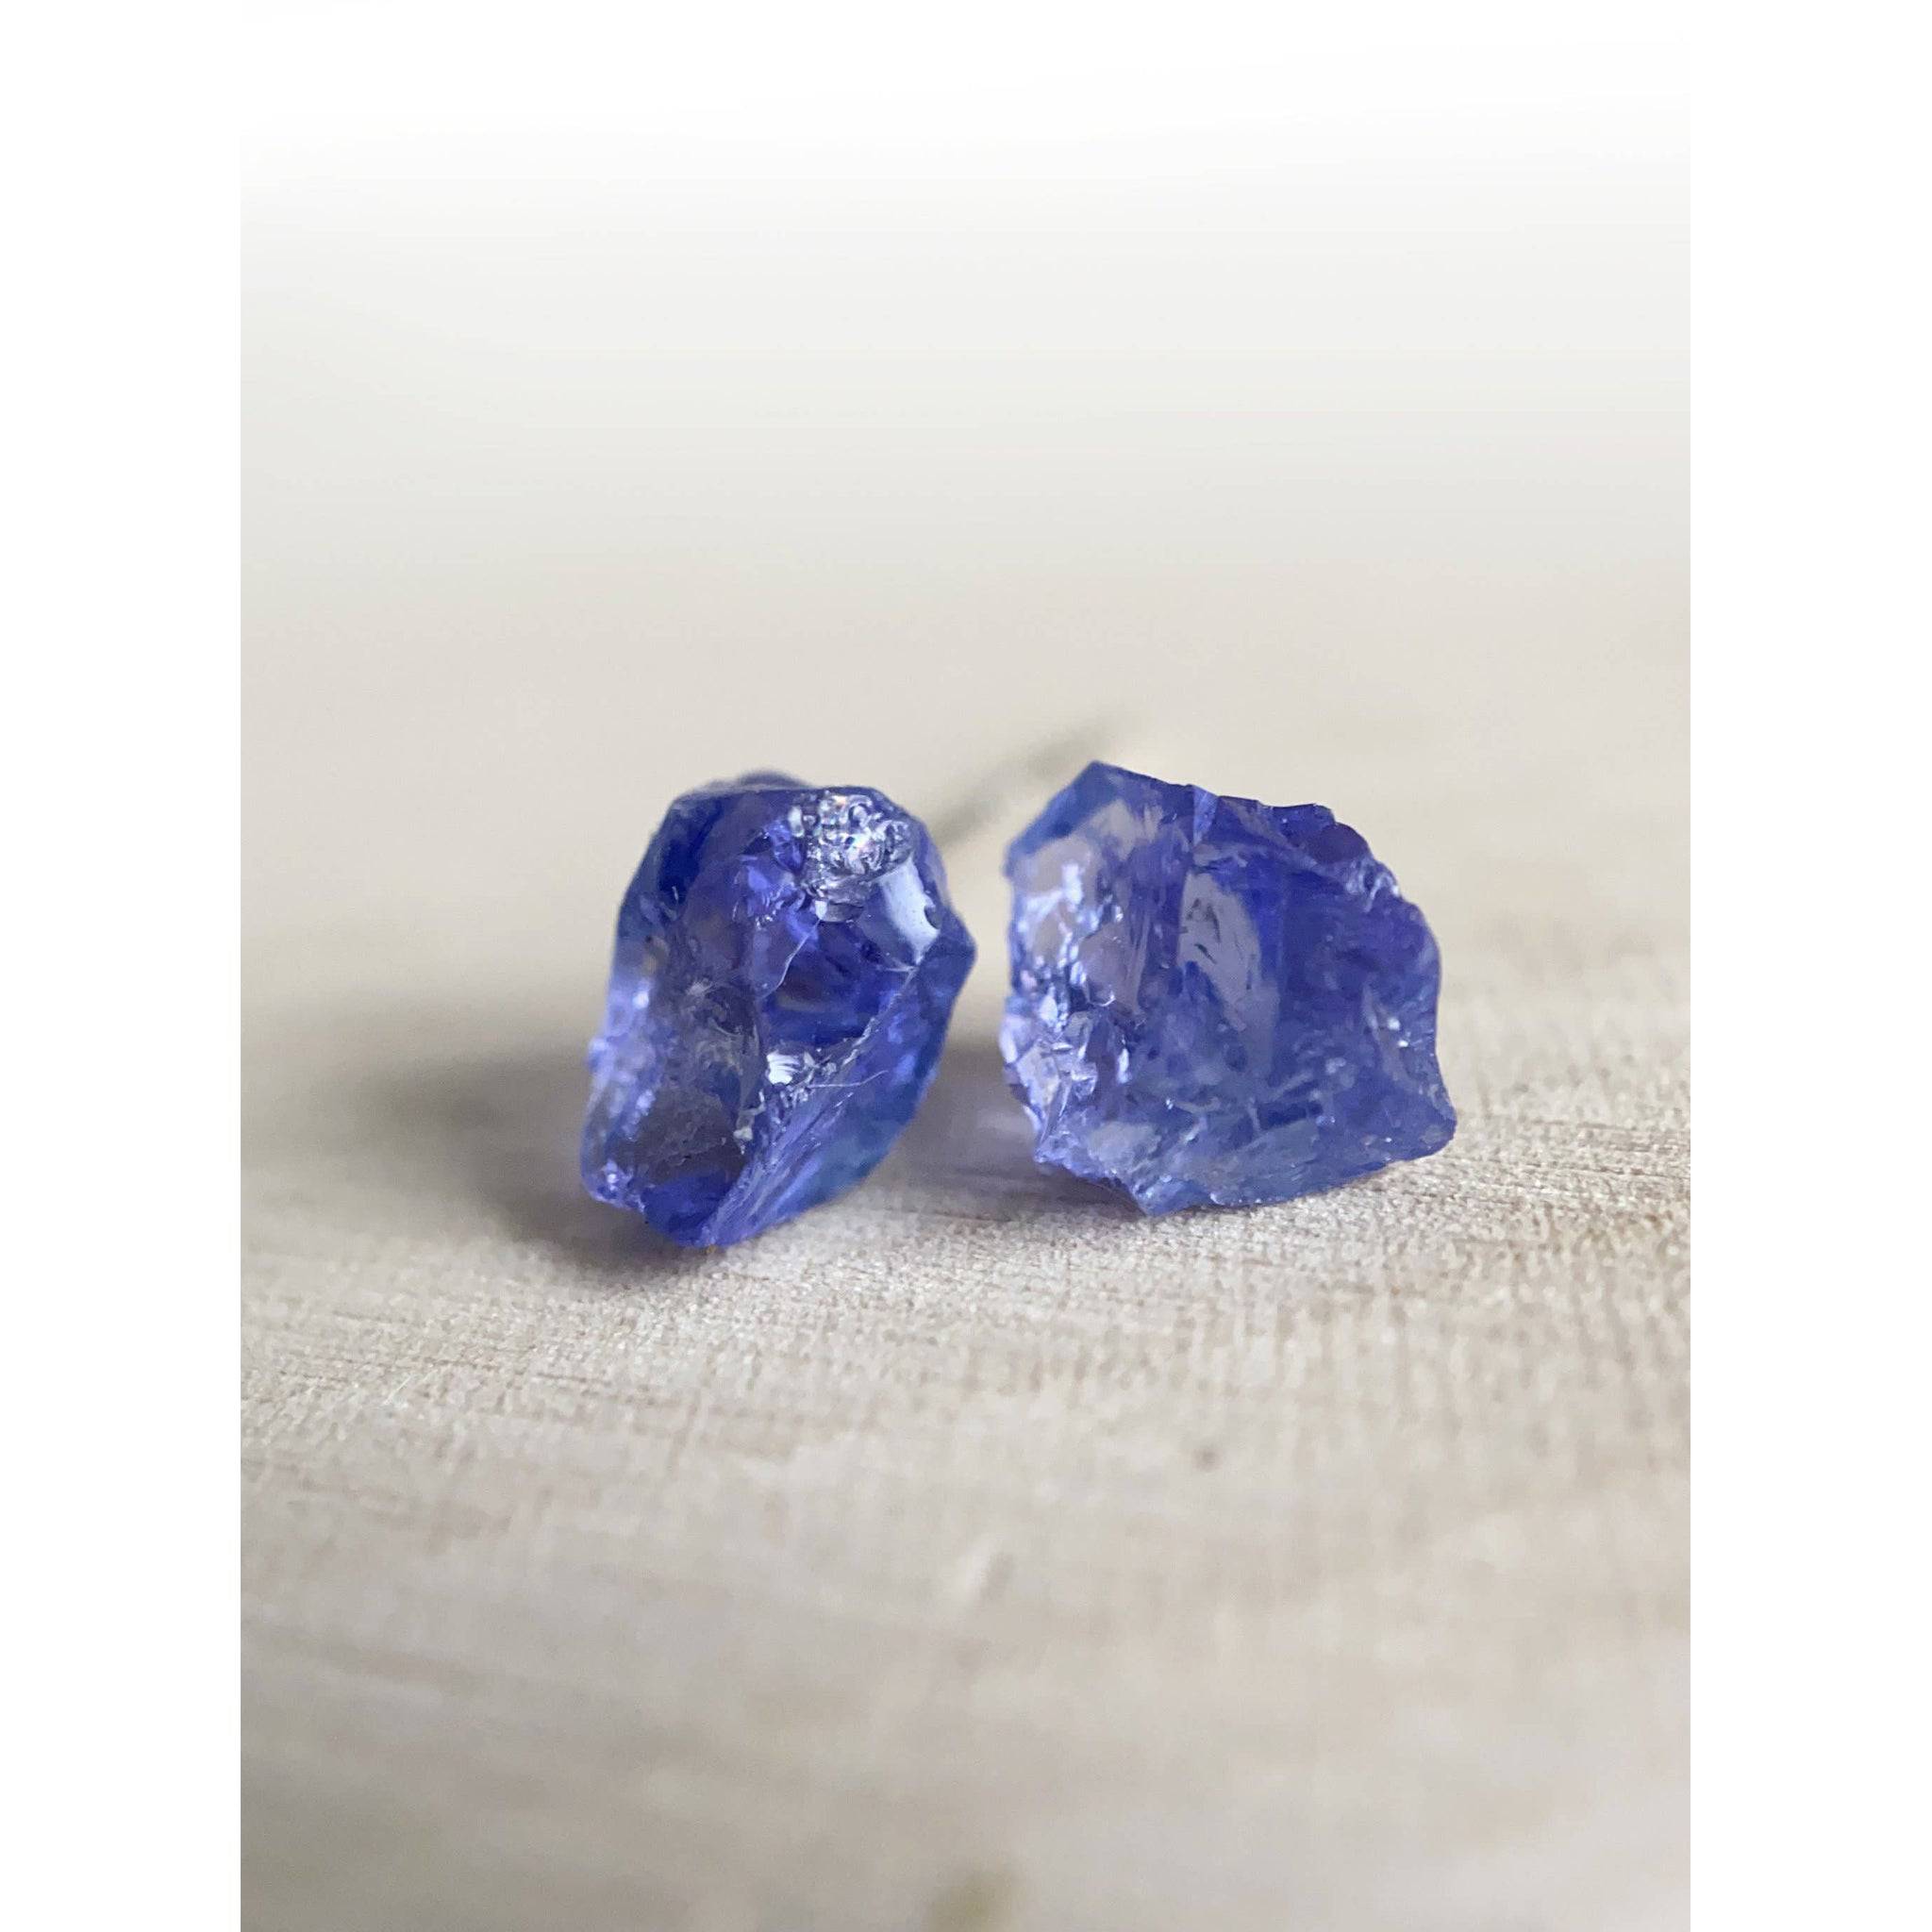 The Mermaid Scale Earring - Raw Tanzanite - The Gilded Witch